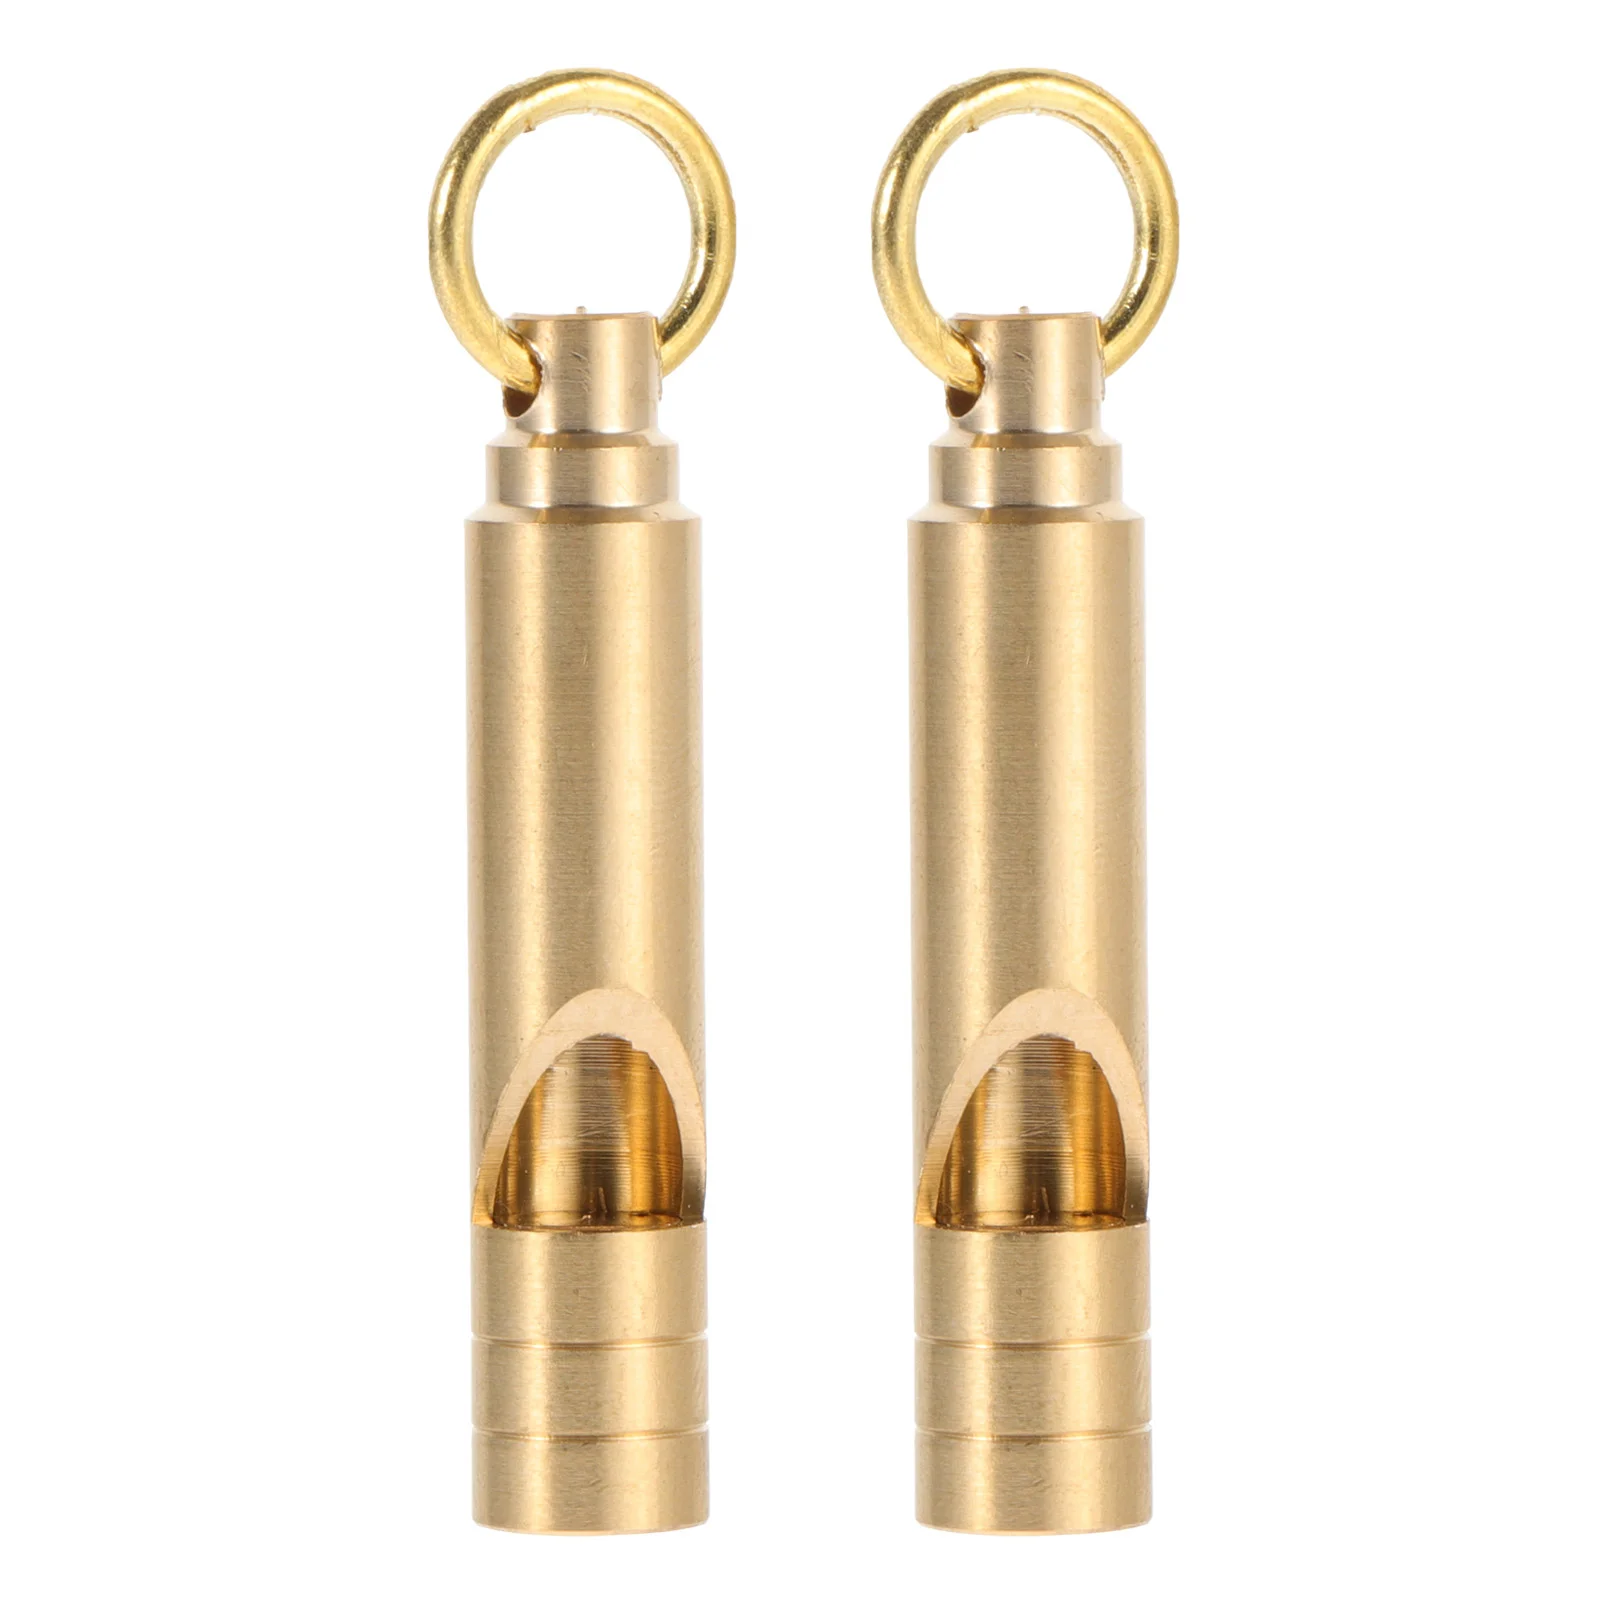 

Whistle Brass Pendant Outdoor Competition Referee Retro Searching Survival Emergency Vintage Aid Tool Accessory First Portable